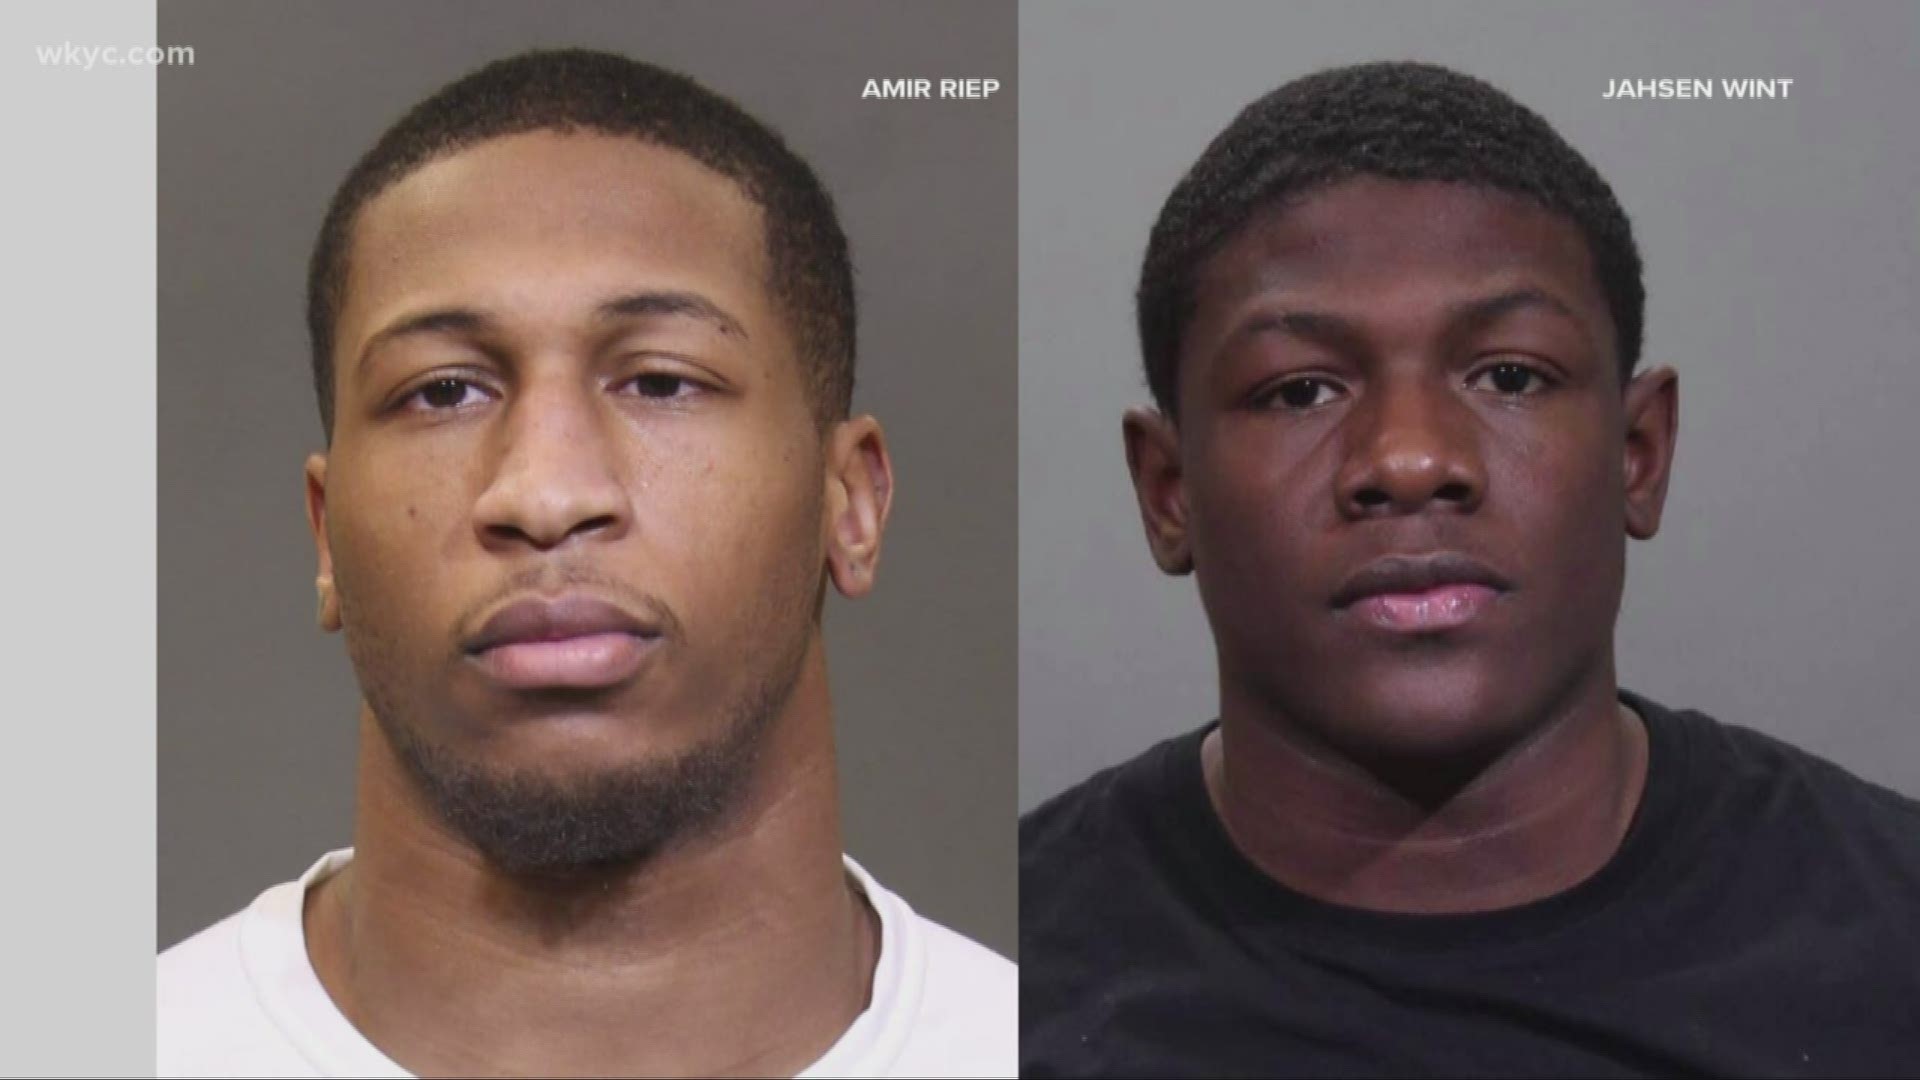 Amir Riep and Jahsen Wint have been dismissed from the Buckeyes football program. The two are being charged with rape and kidnapping.